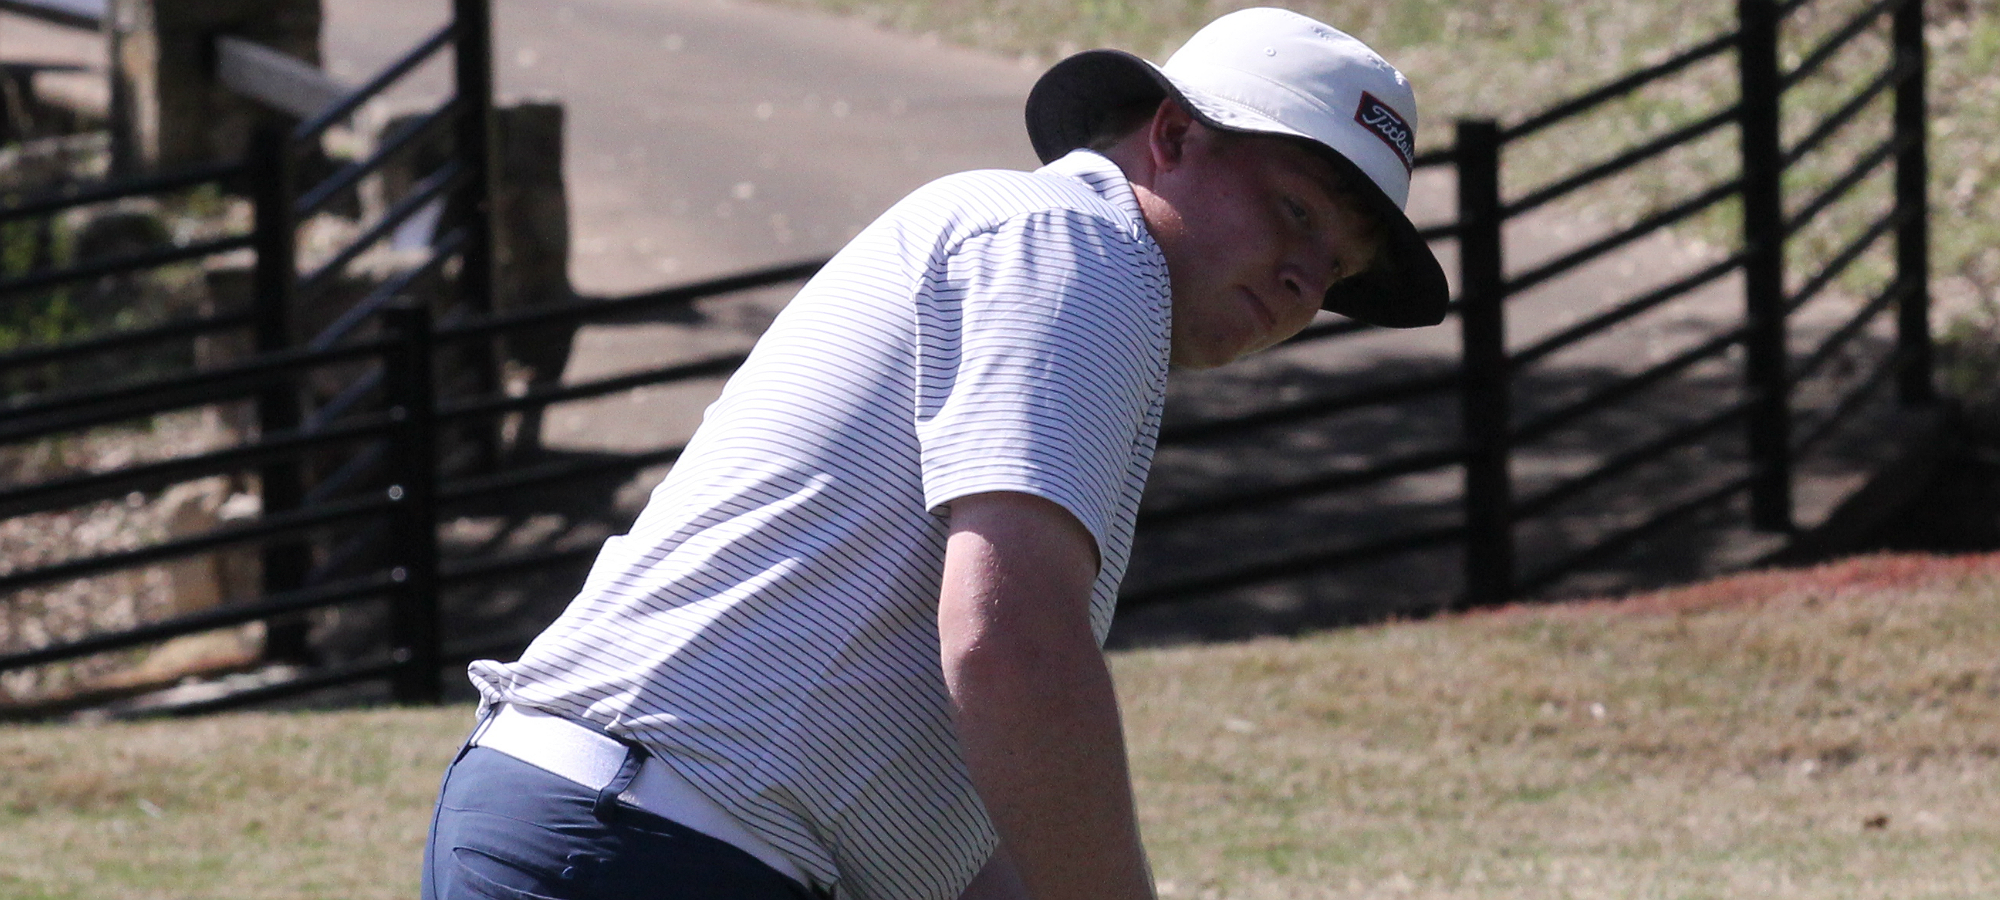 Wade led the Crusaders both rounds and tops his low two round personal-best from earlier this season by 3.